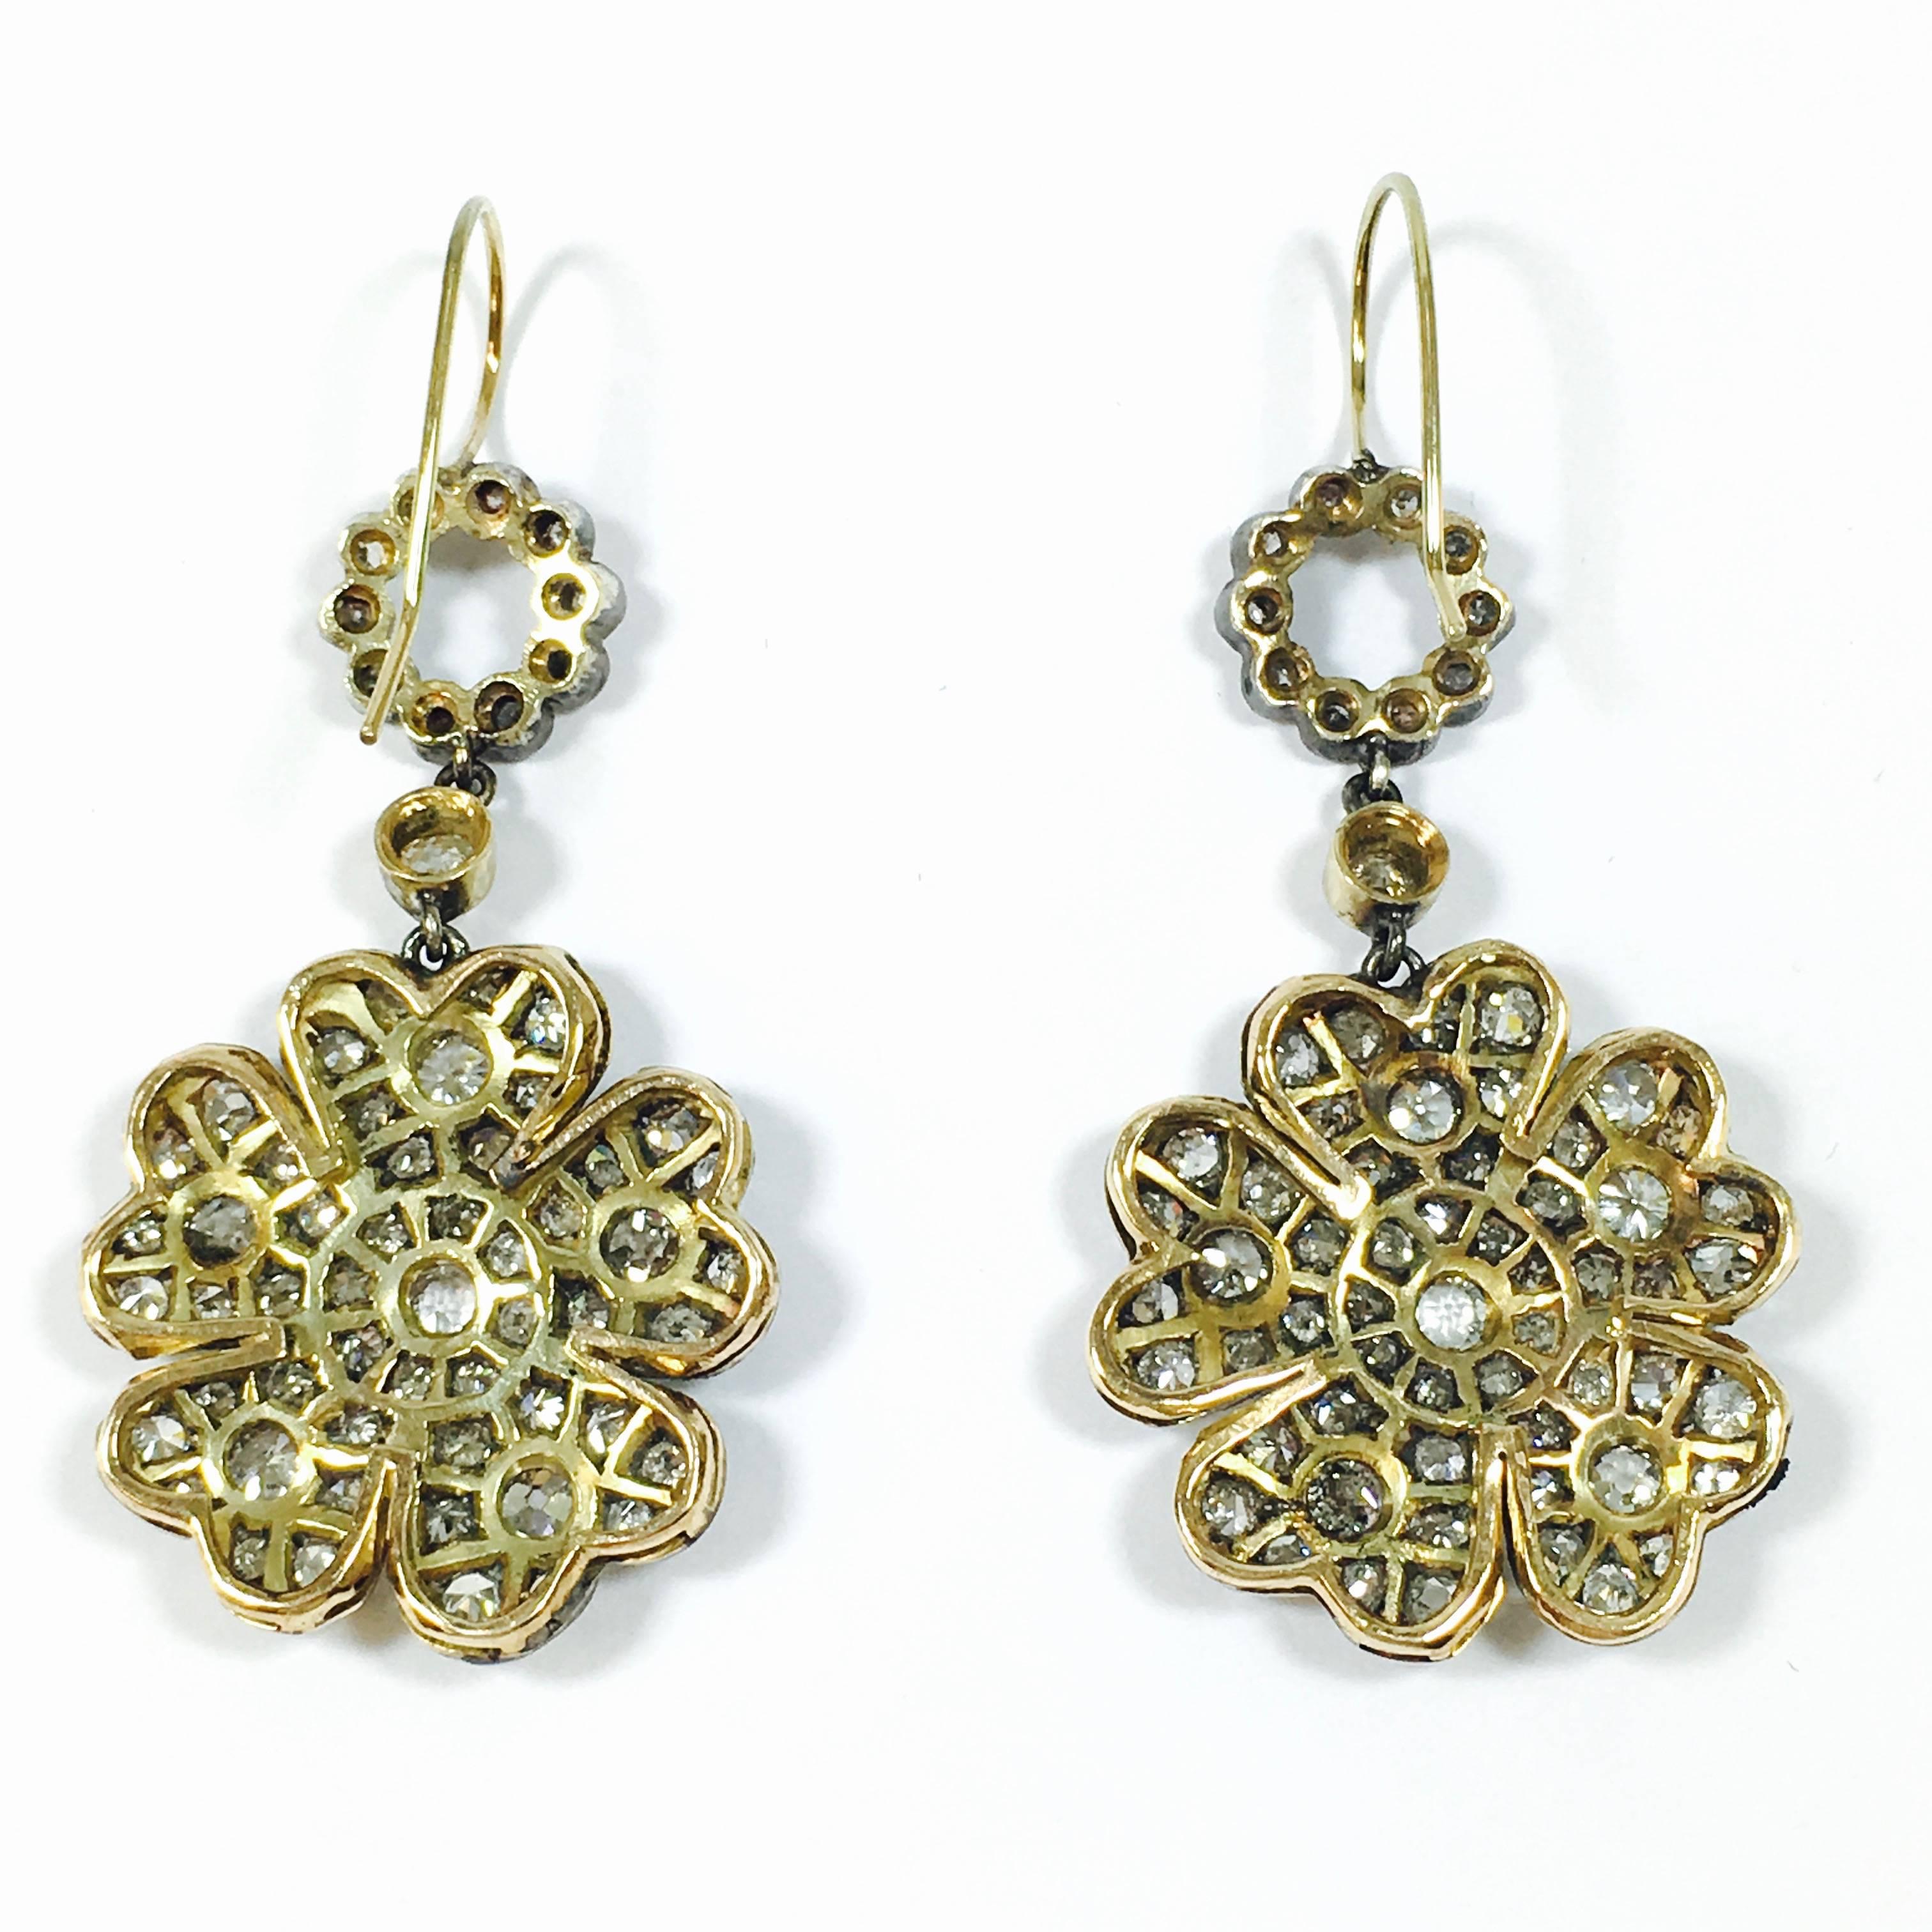 Amazing flower earrings crafted from 14K yellow gold and silver, set with 6 carats of round diamonds. Each earring features 7 individually set old European cut diamonds in yellow gold bezels, and 59 bezel and bead set diamonds.
The silver topping